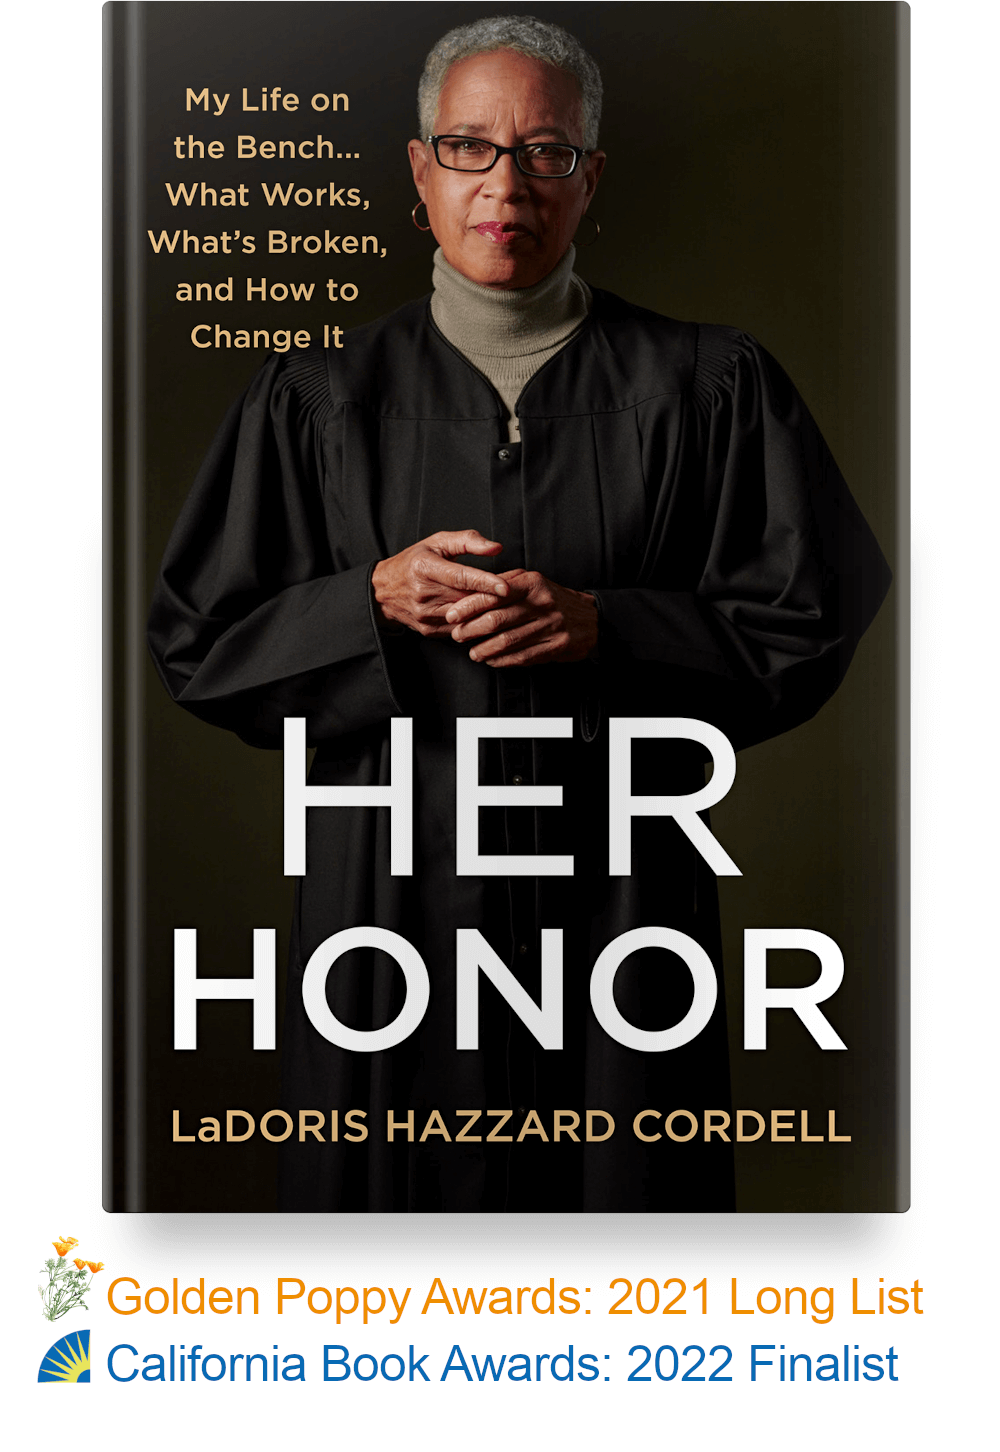 Book cover reads: Her Honor, My life on the Bench, What Works, What's Broken and How to Change It, by LaDoris Hazzard Cordell. It features a standing Judge Cordell looking directly into the camera. She's wearing rectangular black framed eyeglasses, gold hoop earrings, and a turtleneck sweater under her judicial robe. Her hands are gently clasped in front of her